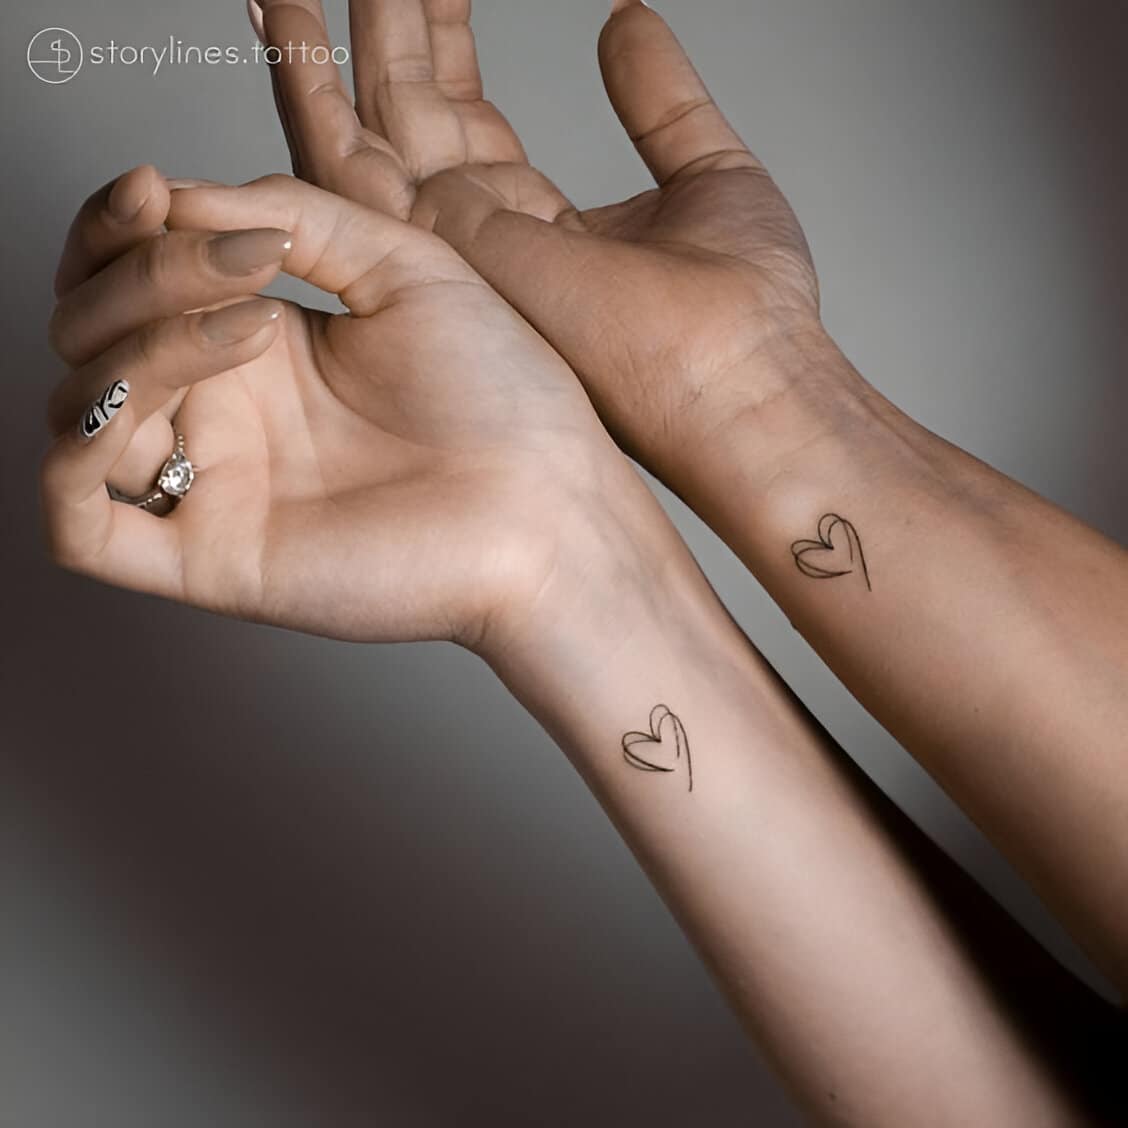 30 Elegant Matching Heart Tattoos To Get With Your Partner ASAP 24